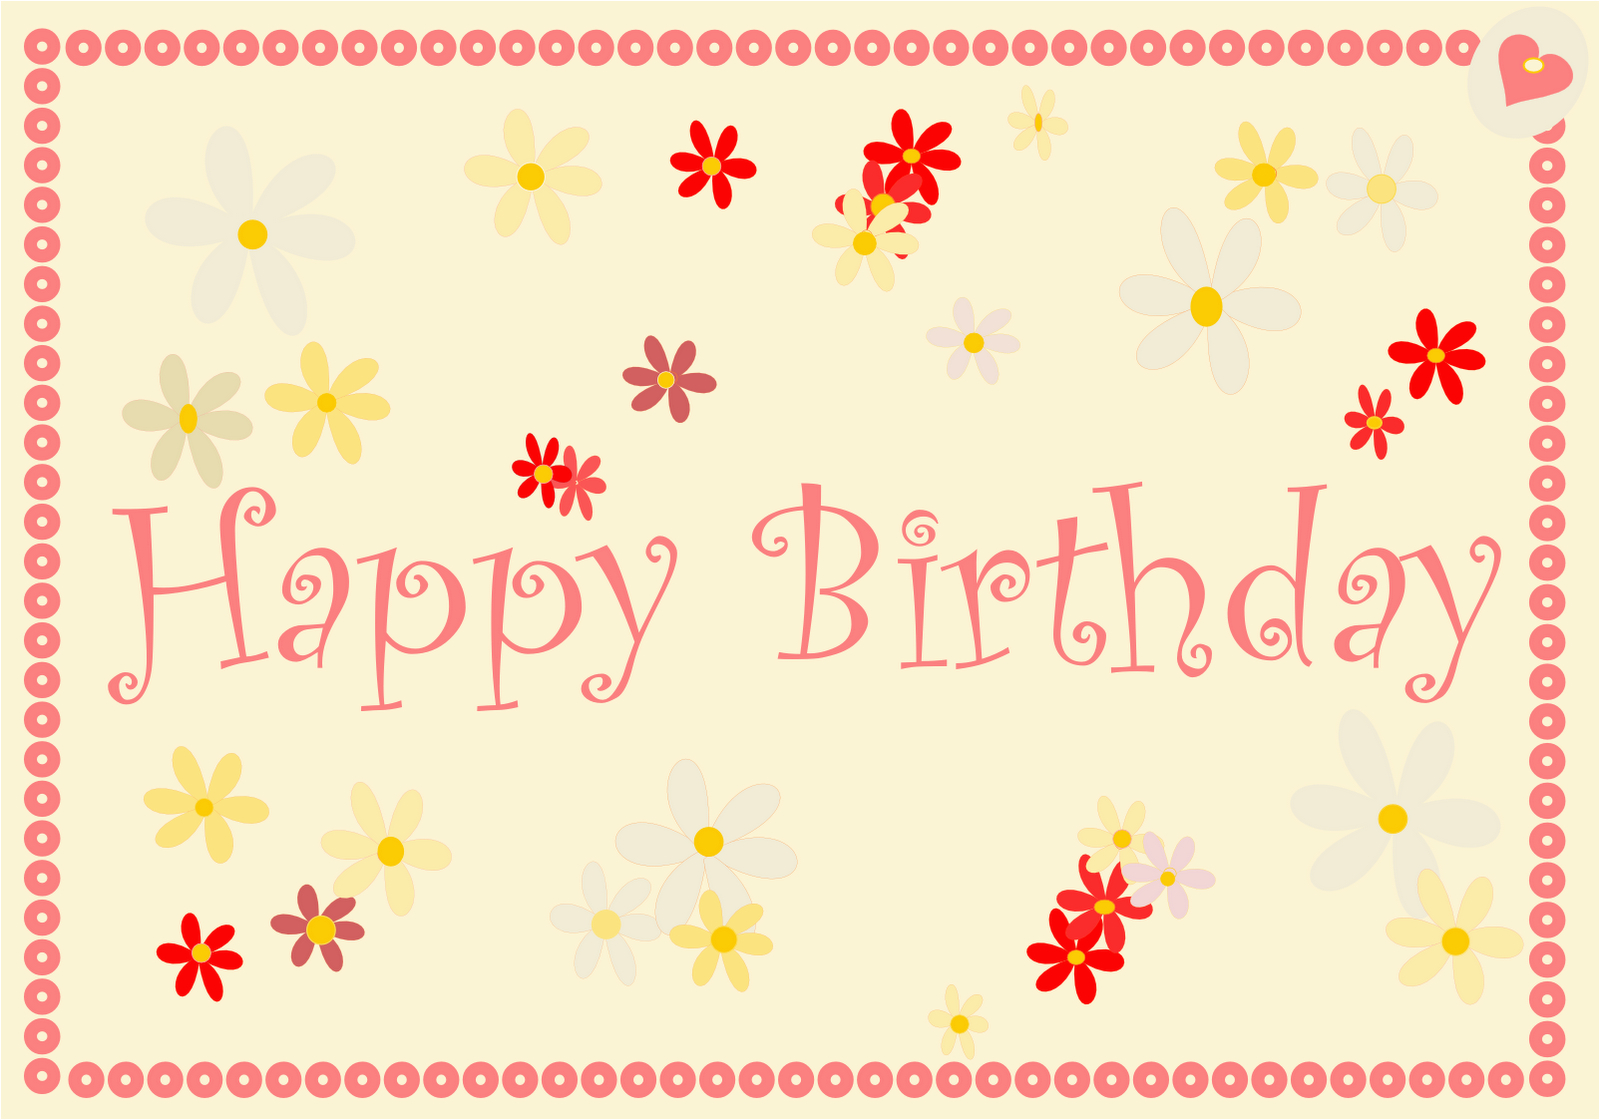 35 happy birthday cards free to download